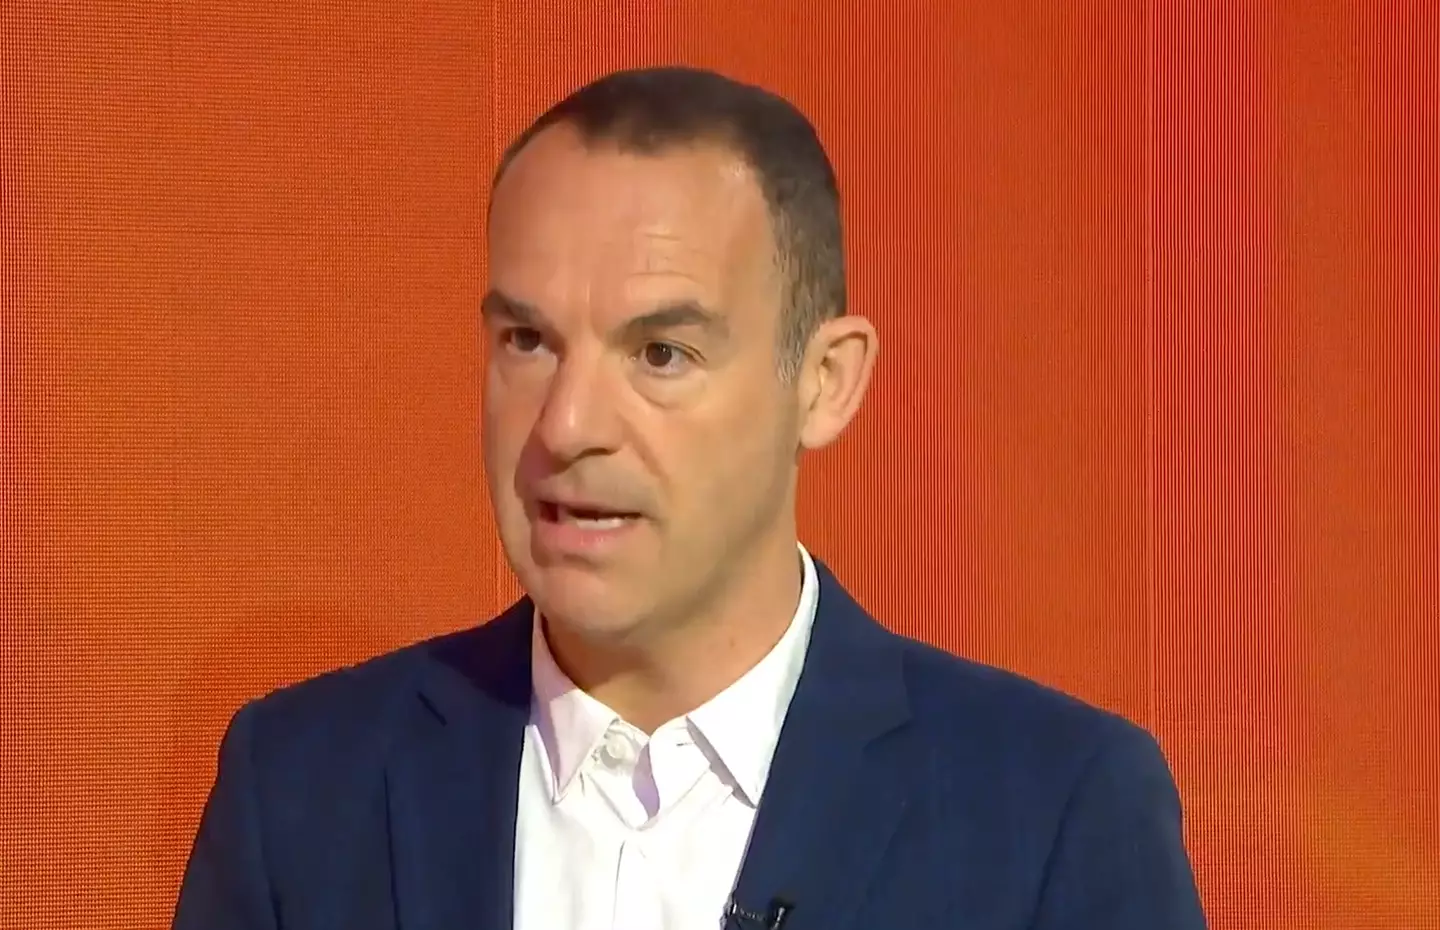 Money saving expert Martin Lewis has revealed how much energy bills will drop amid Ofgem's price cap cut.